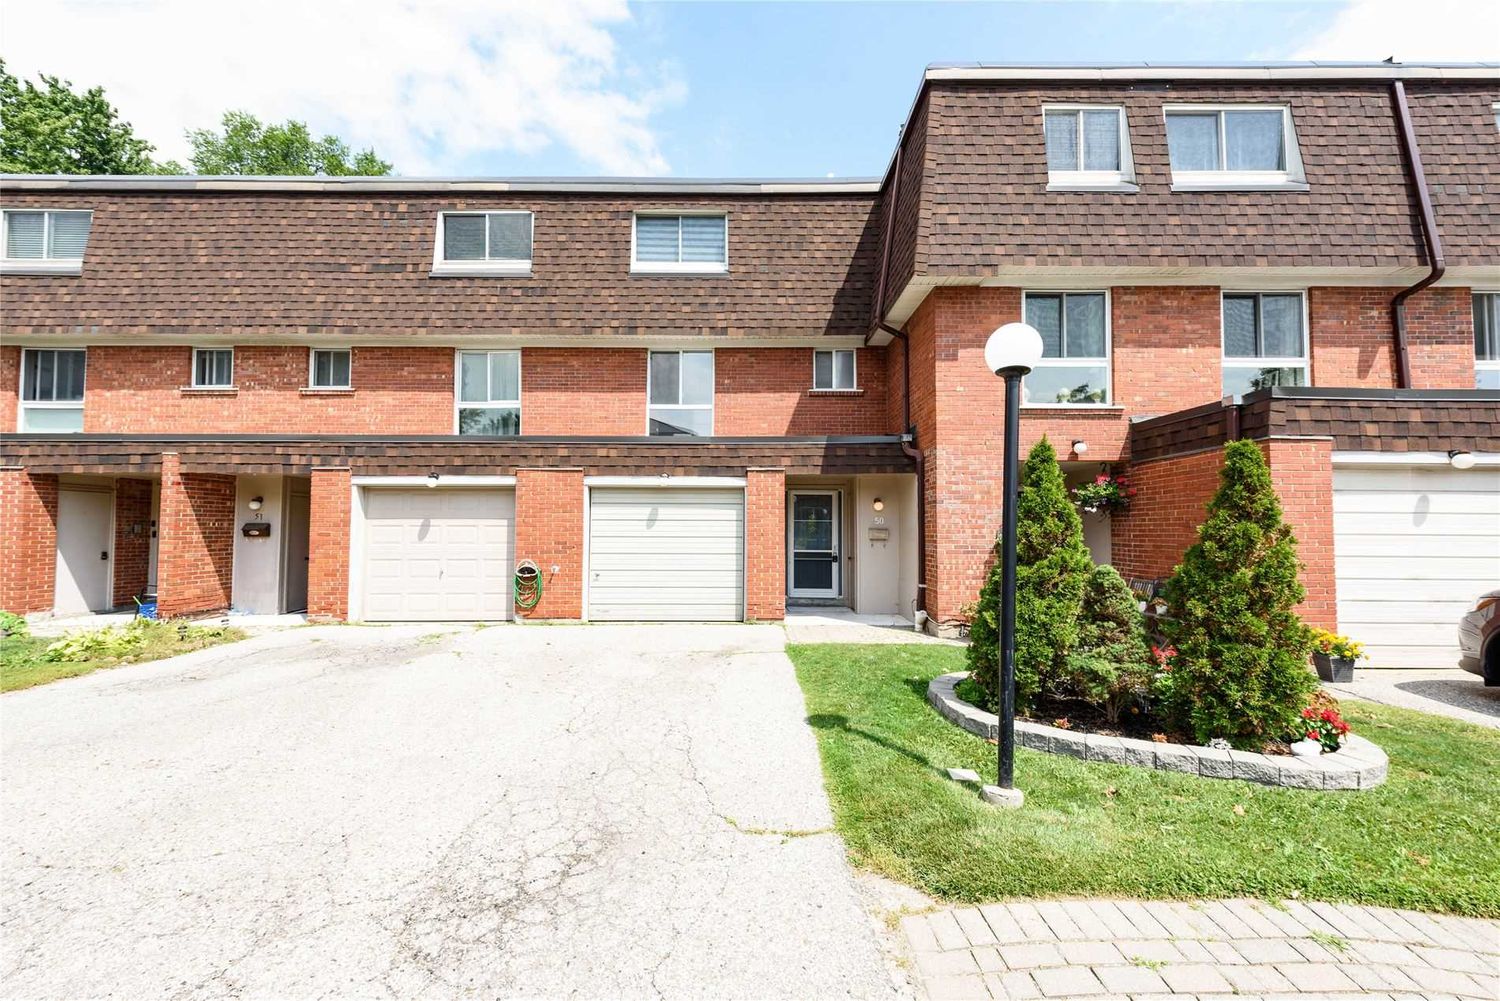 2395 Bromsgrove Road. 2395 Bromsgrove Road Townhomes is located in  Mississauga, Toronto - image #1 of 2